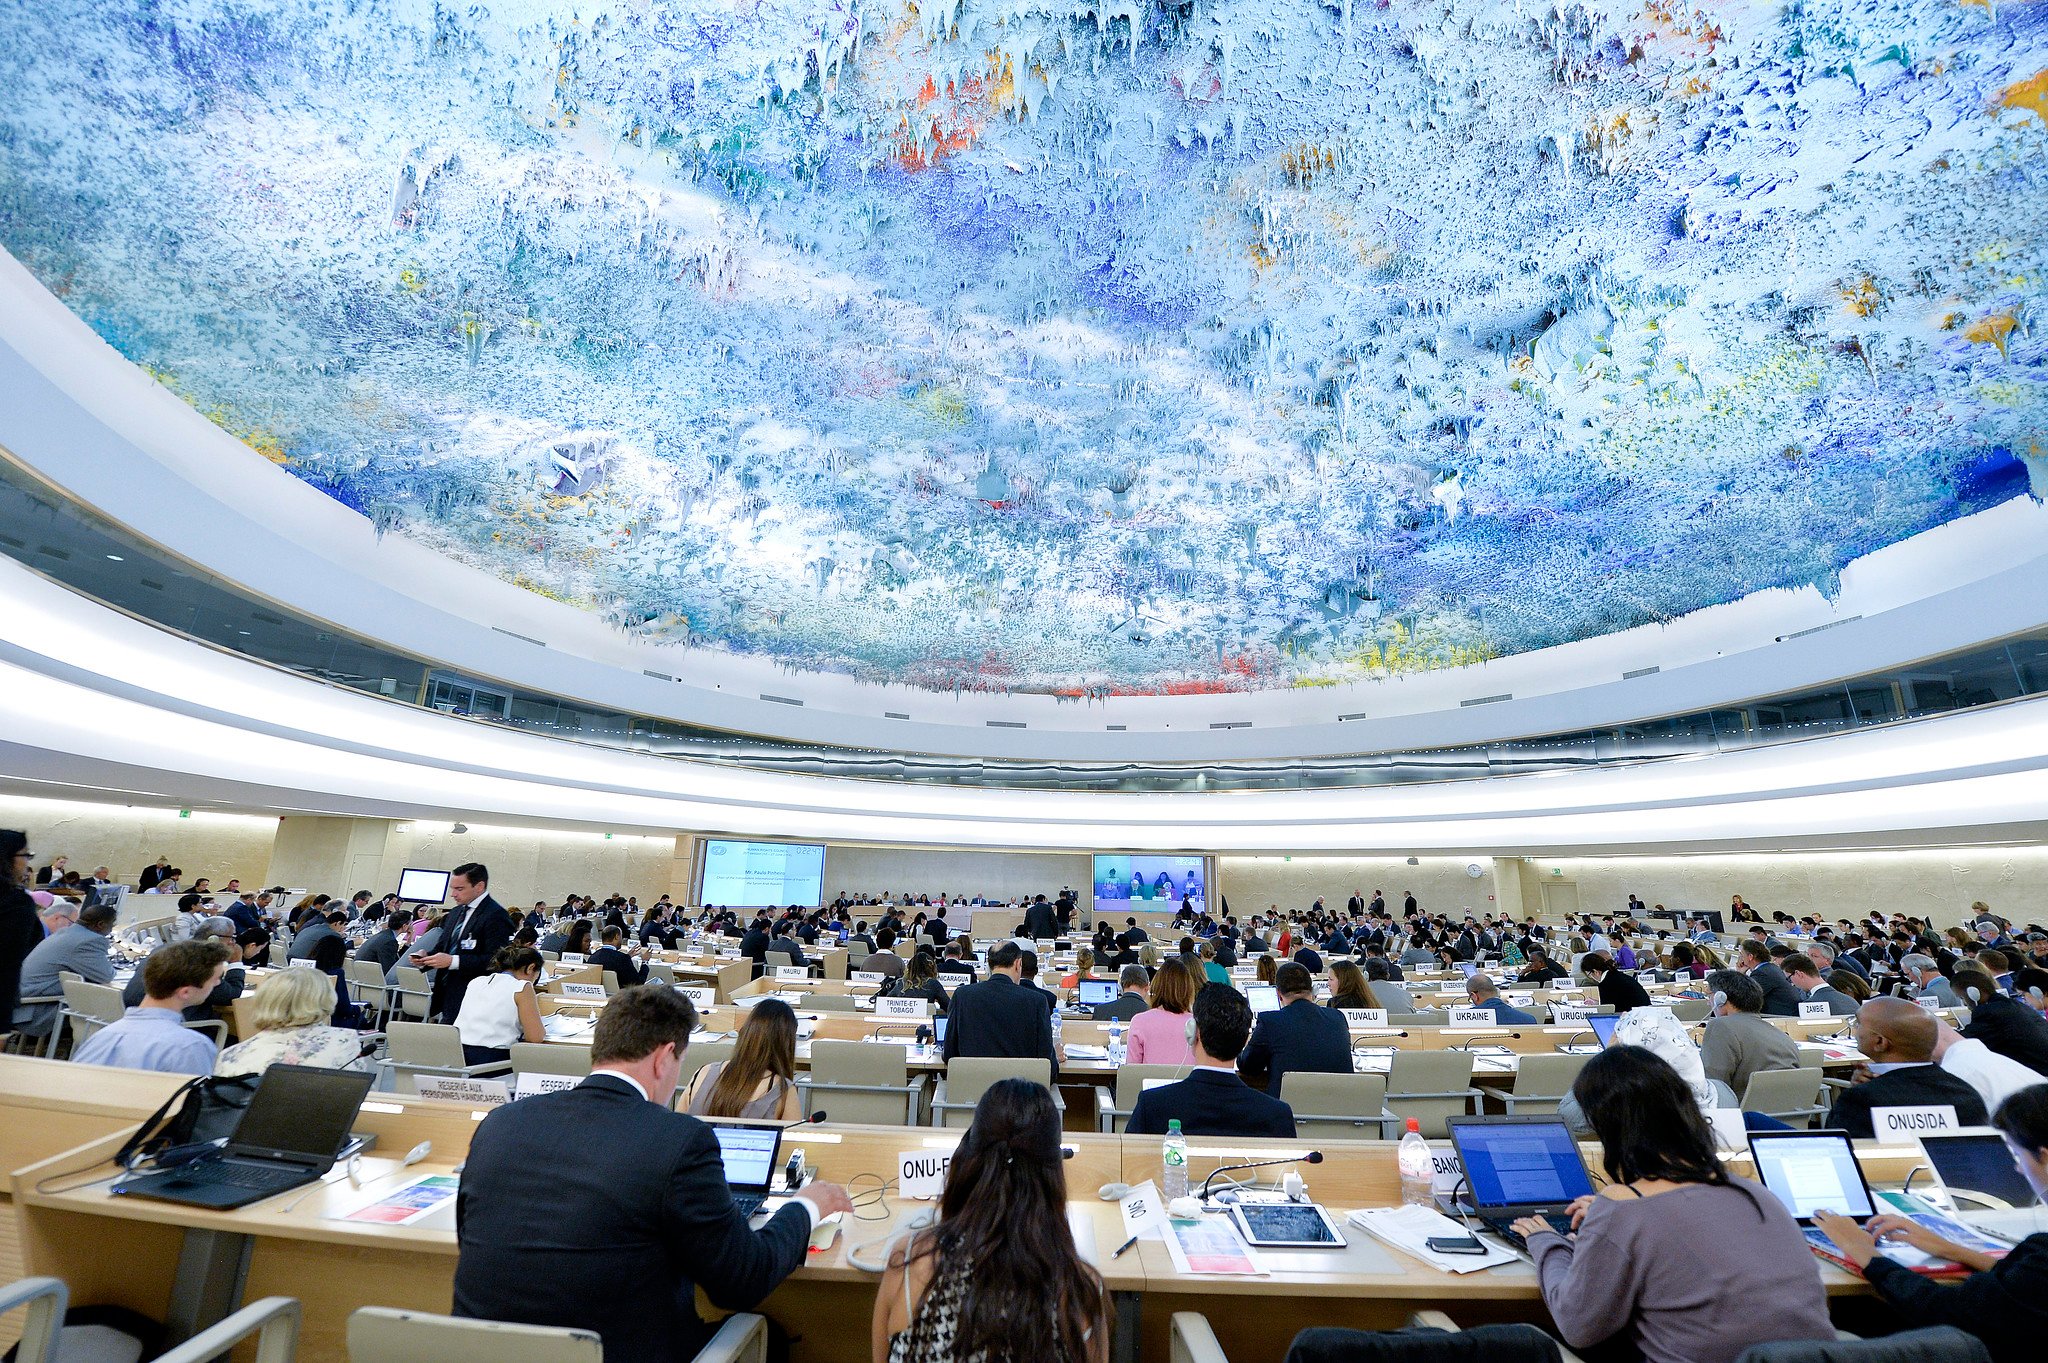 A general view during of the Presentation of the report on the situation in Syria at the Twenty-Seventh session of the Human Rights Council. 16 September 2014. UN Photo / Jean-Marc Ferré